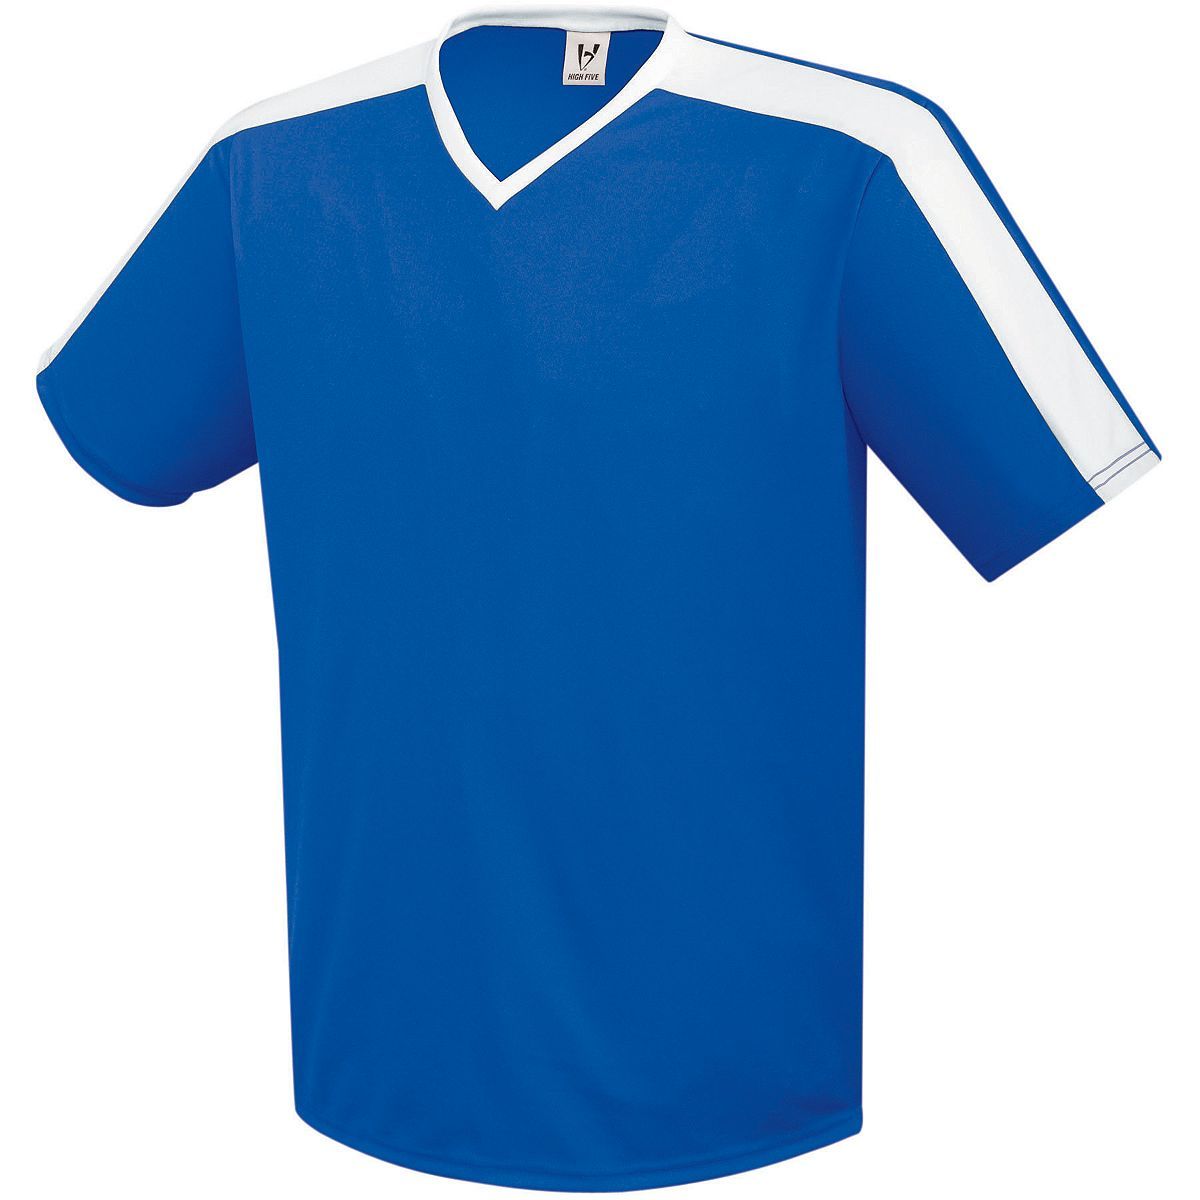 High 5 Genesis Soccer Jersey in Royal/White  -Part of the Adult, Adult-Jersey, High5-Products, Soccer, Shirts, All-Sports-1 product lines at KanaleyCreations.com